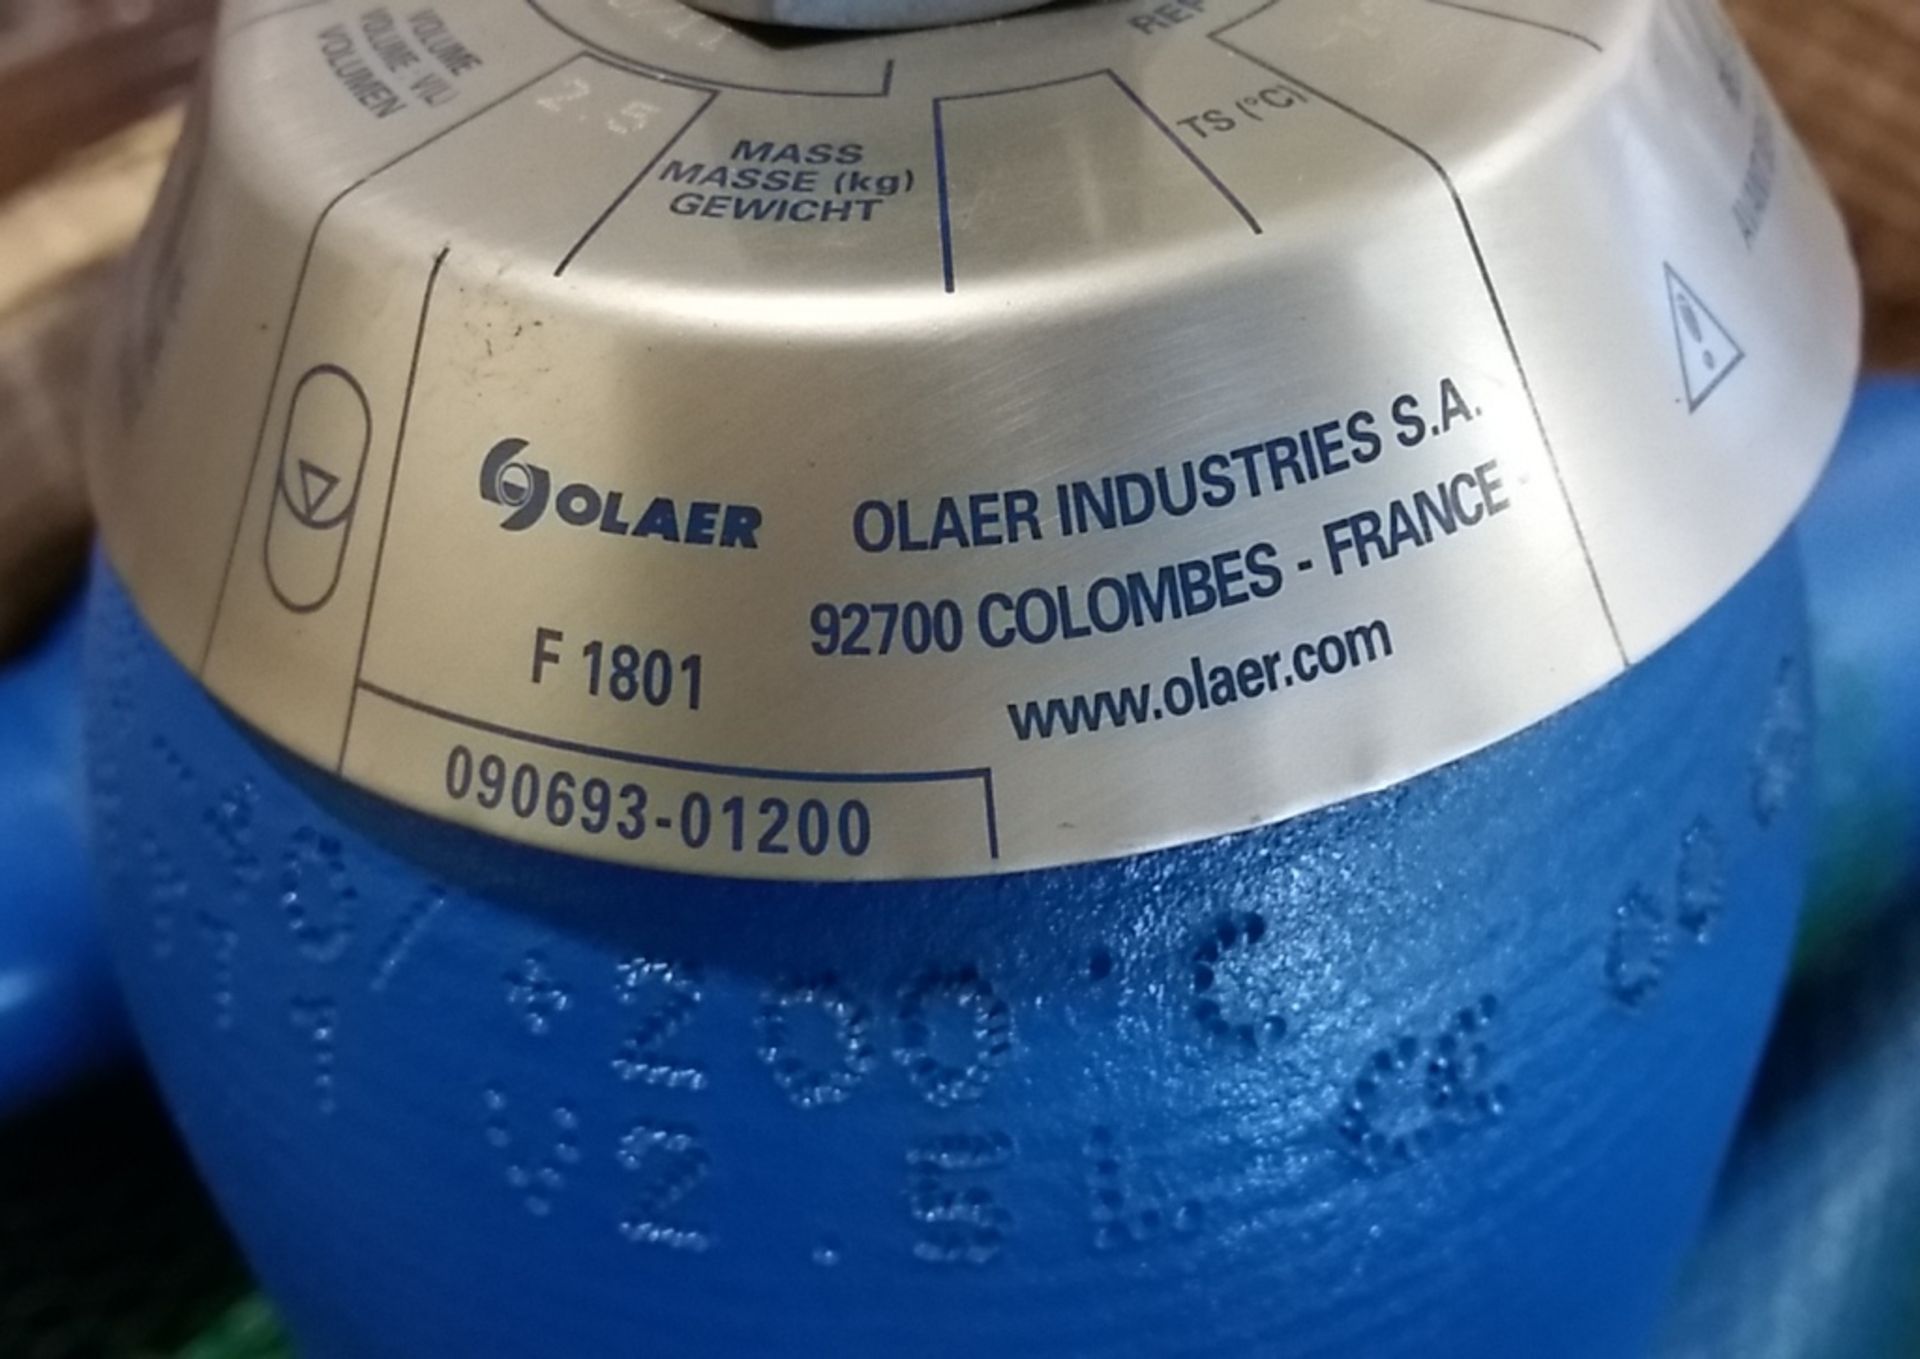 Solaer F1901 pressure vessels x12 - Image 9 of 11